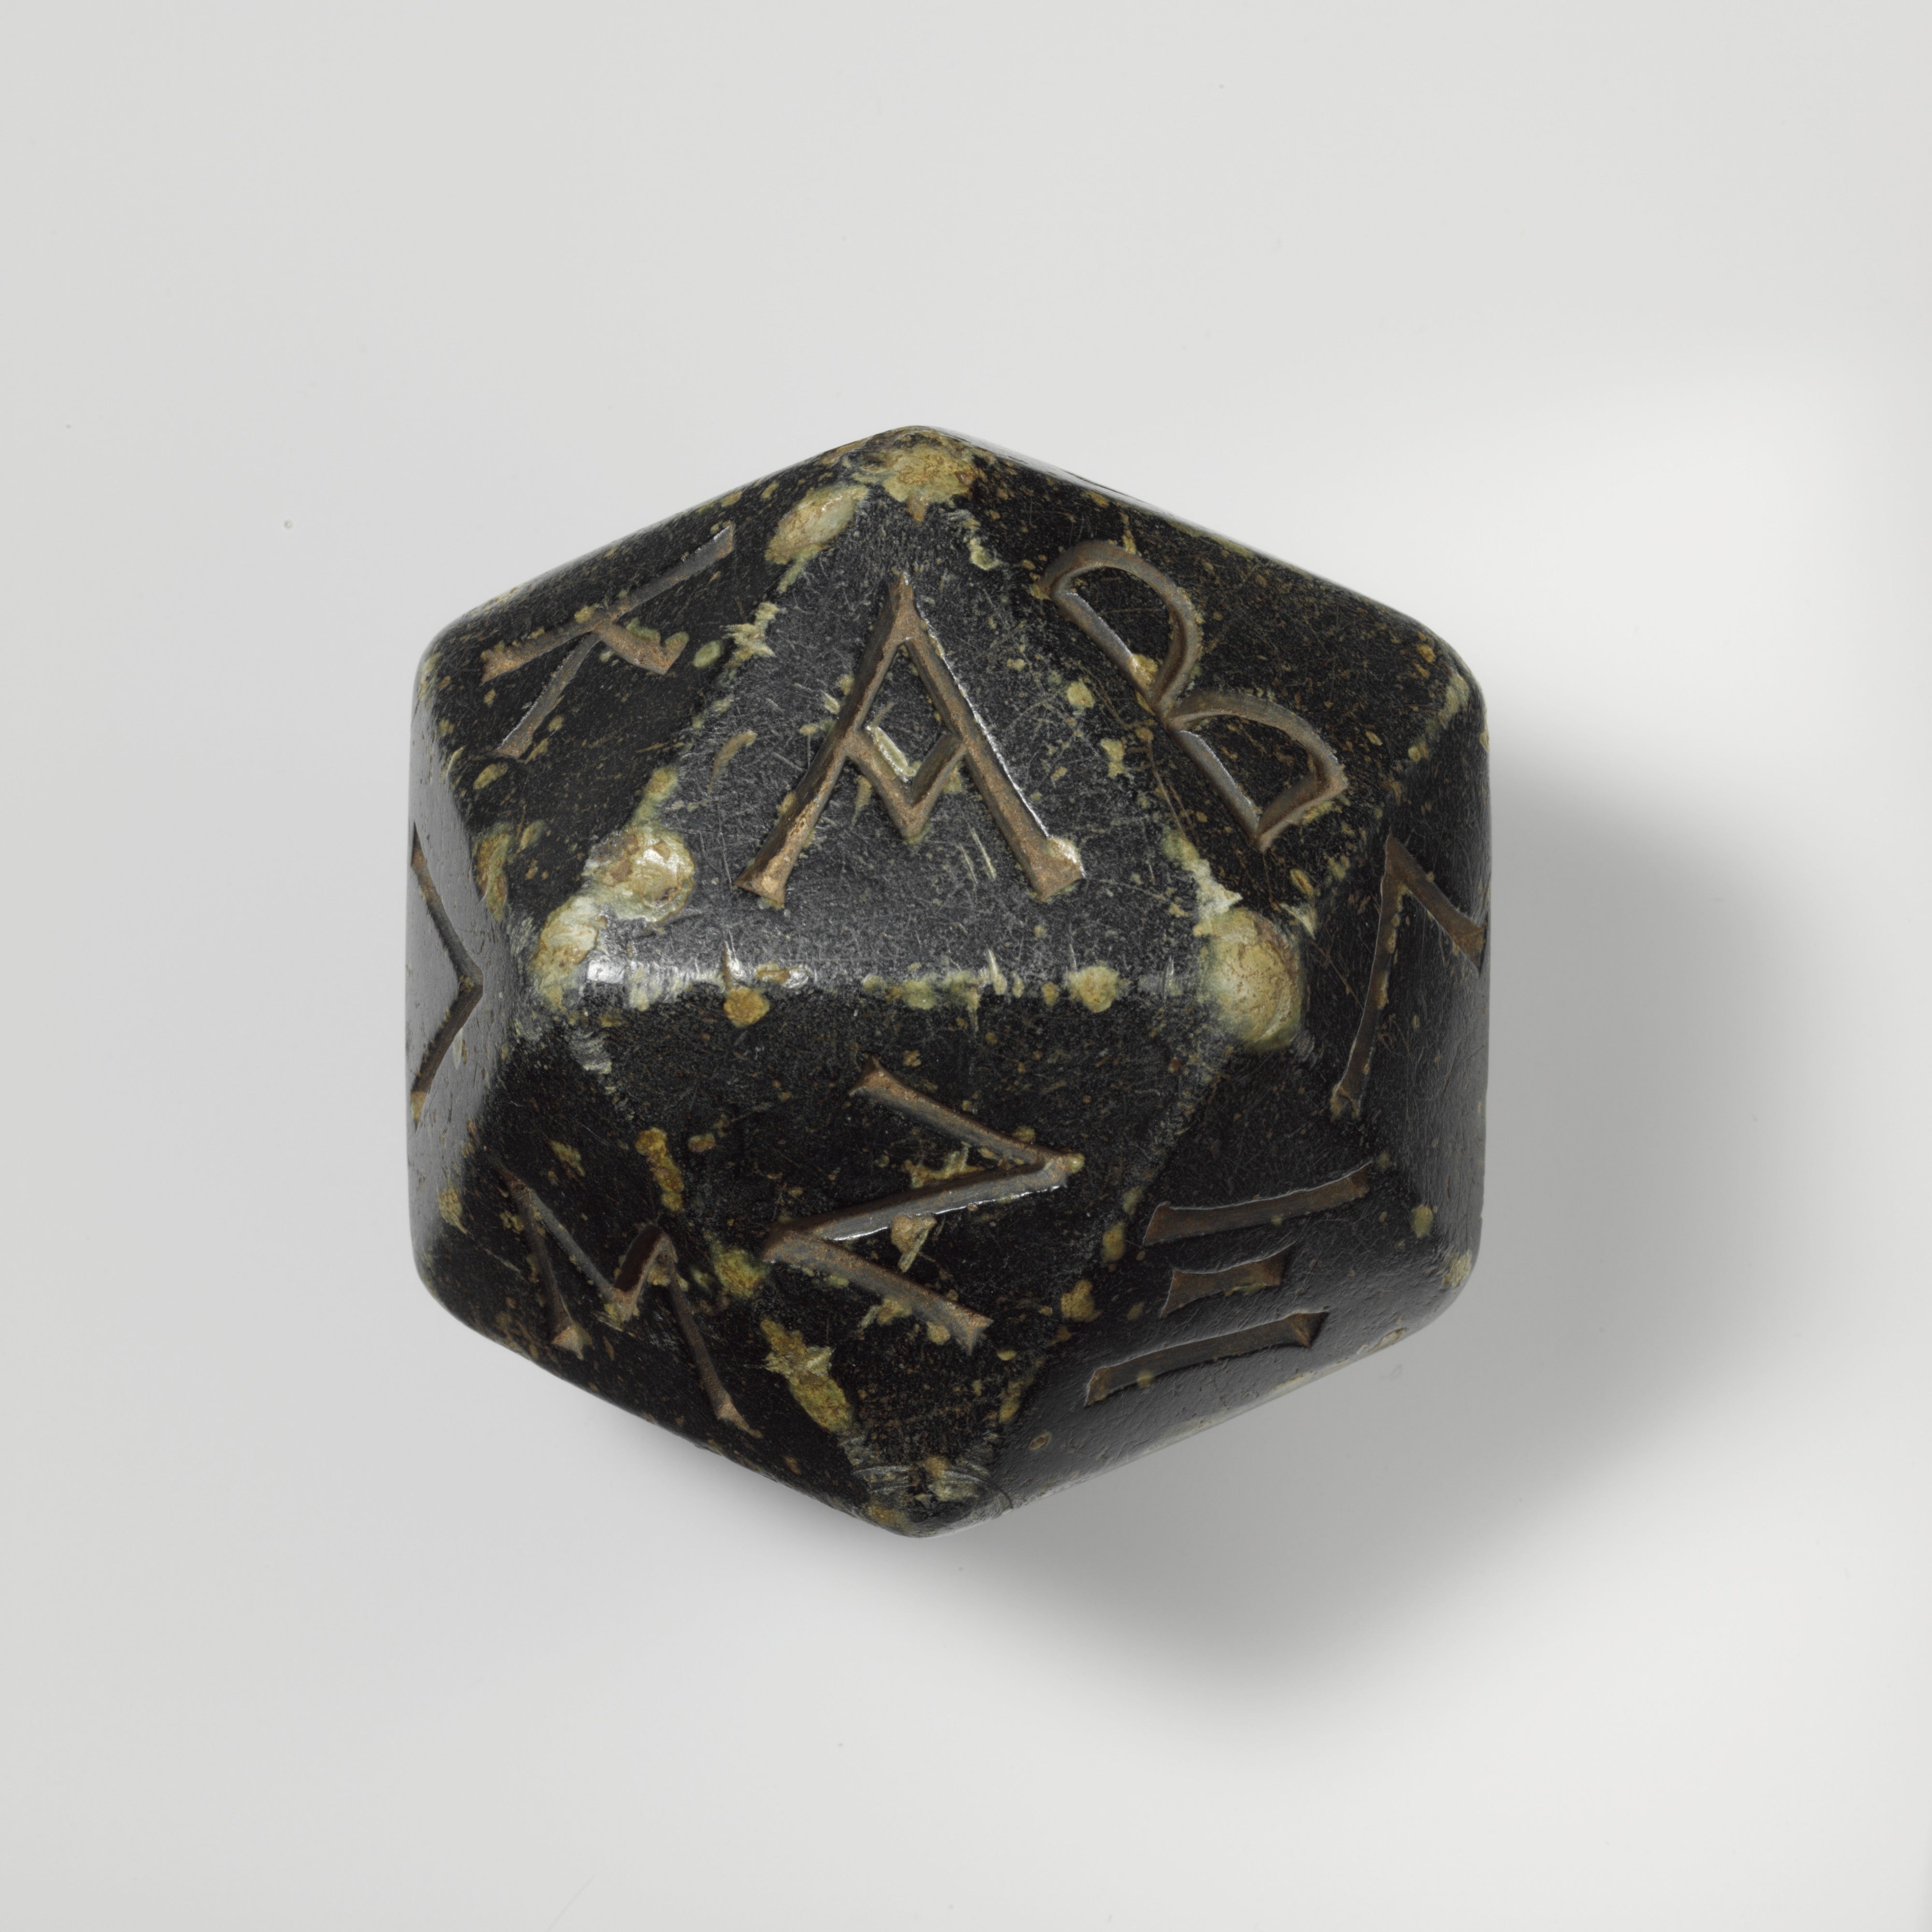 6 Ancient D20s That Will Definitely Not Curse You